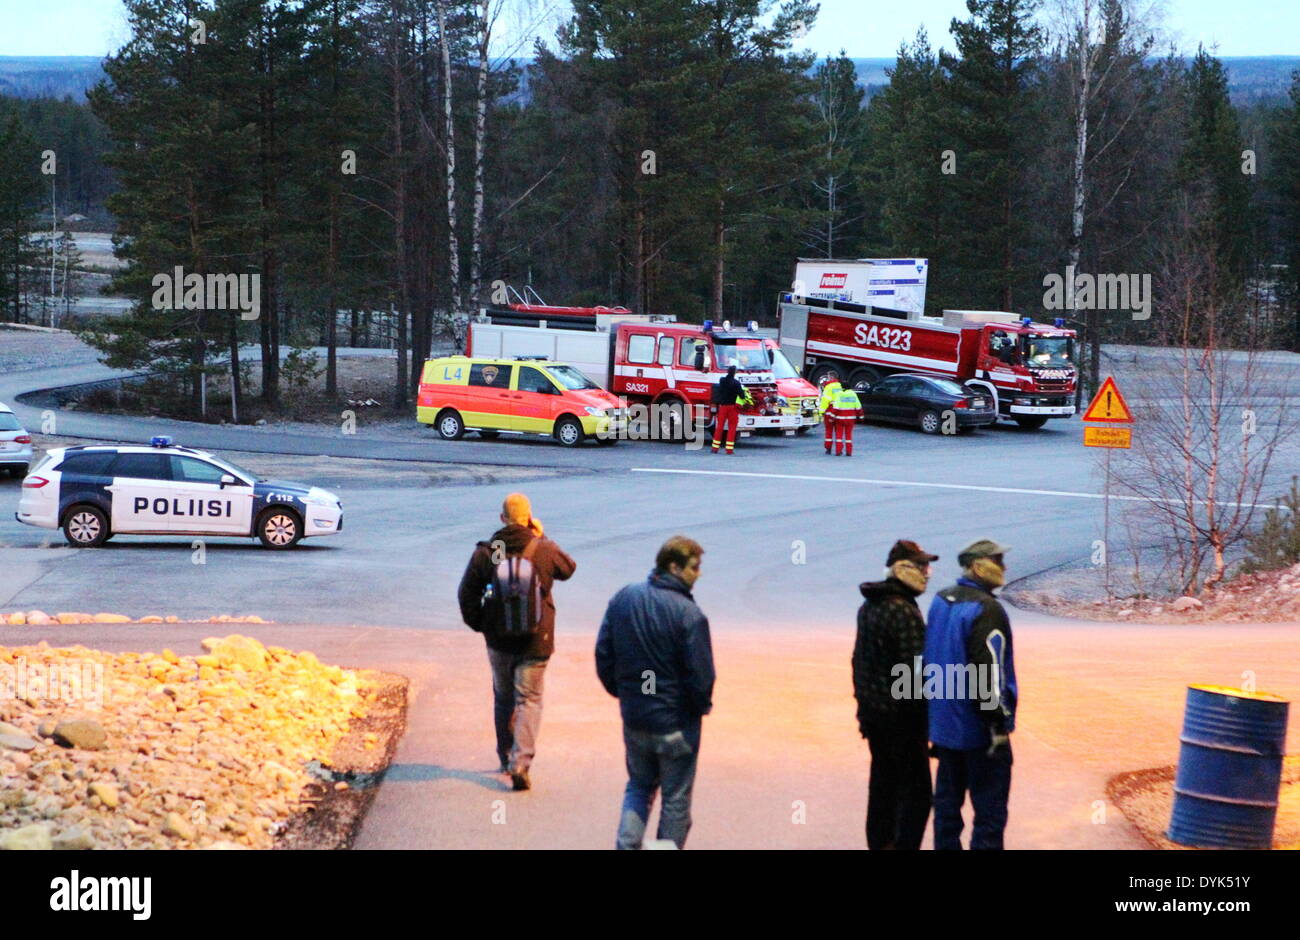 Jamijarvi, Finland. 20th Apr, 2014. Rescuers are seen at the Jamijarvi Airport, a popular gliding center shared by parachuting clubs, Finland, April 20, 2014. A small passenger plane carrying 10 parachuters crashed on Sunday near the Jamijarvi Airport in the Satakunta region, Southwest Finland, causing eight dead. © Zhang Xuan/Xinhua/Alamy Live News Stock Photo